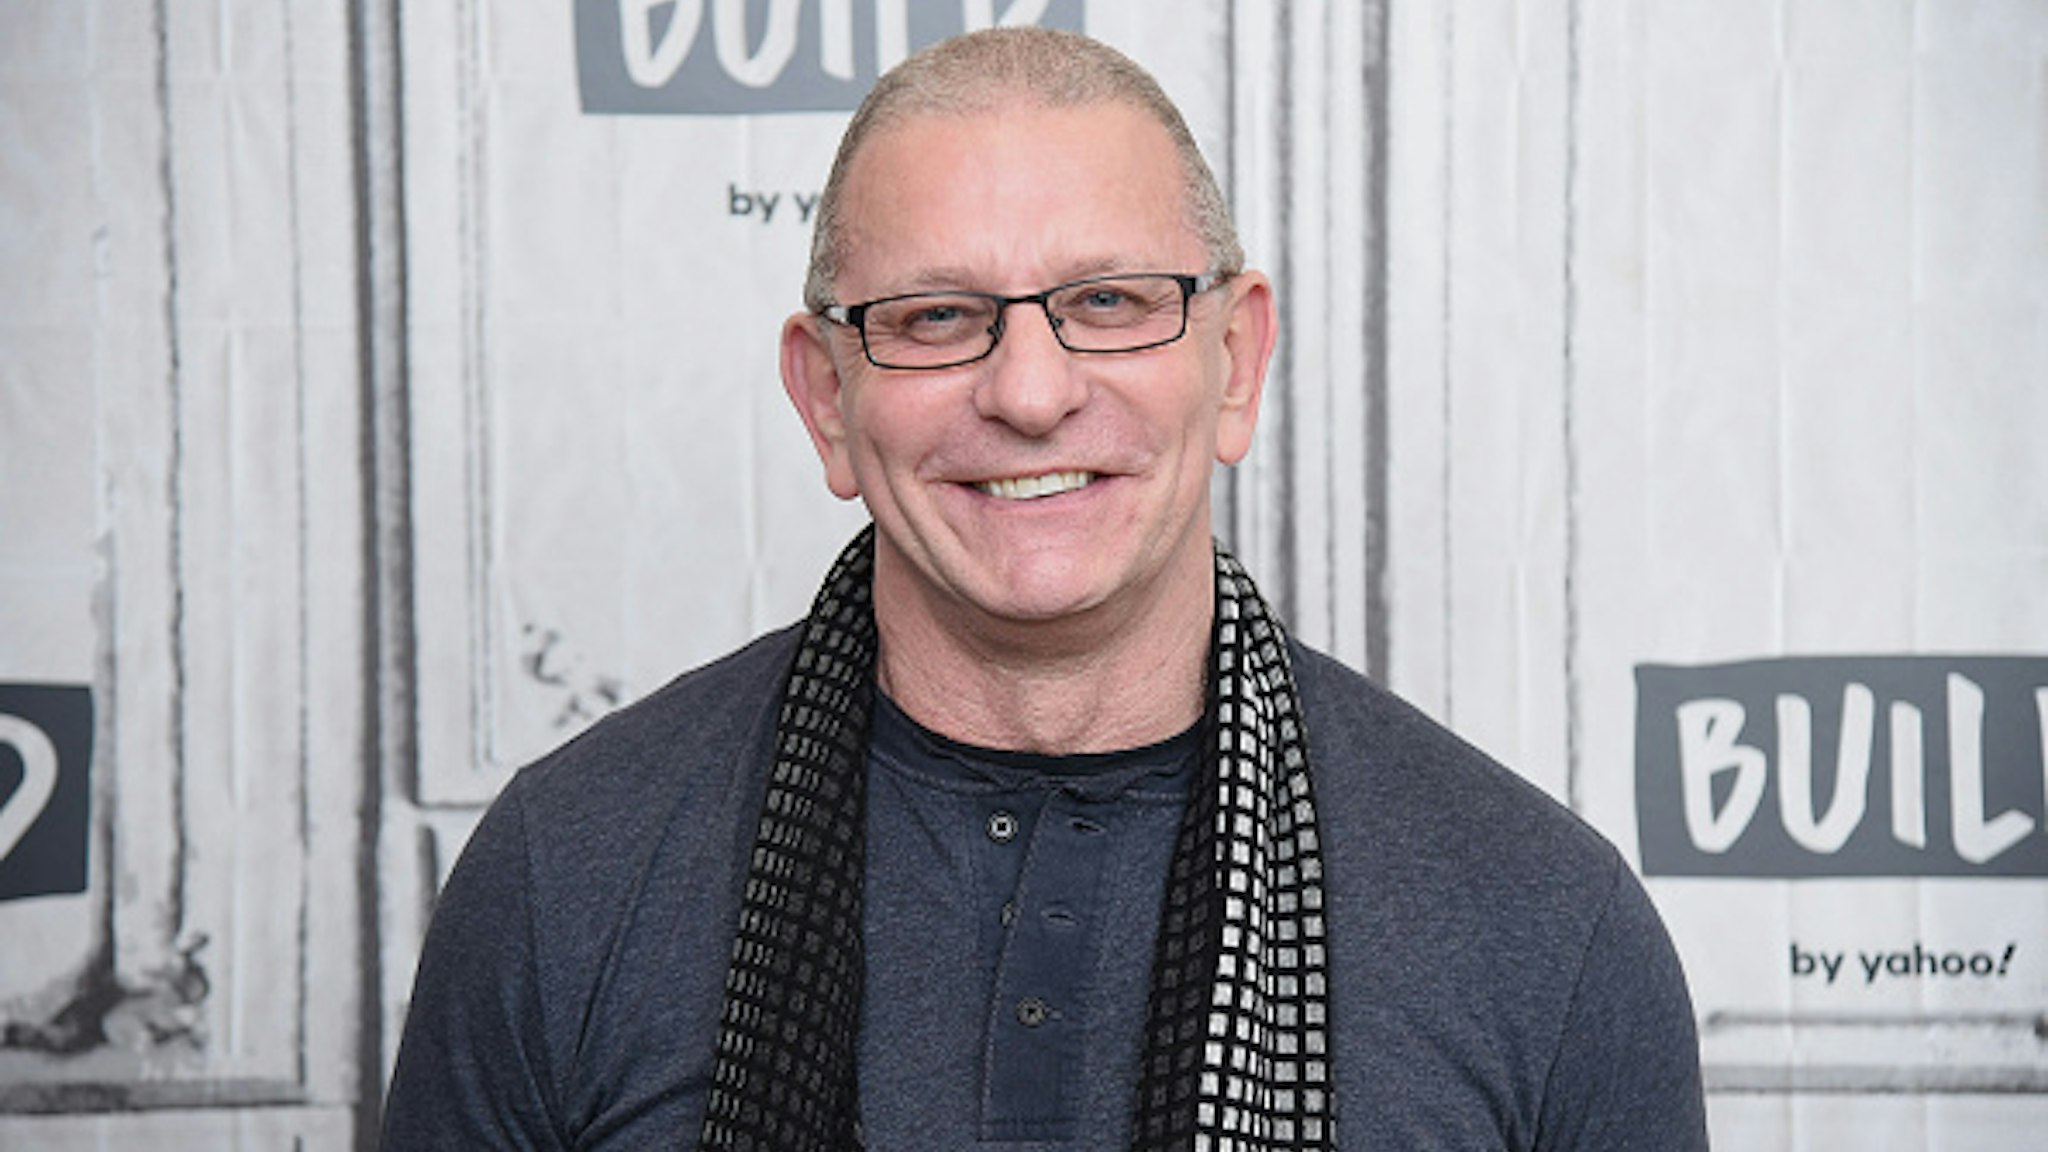 NEW YORK, NEW YORK - JANUARY 13: Chef and TV personality Robert Irvine visits the Build Series to discuss The Food Network series “Restaurant: Impossible” at Build Studio on January 13, 2020 in New York City.